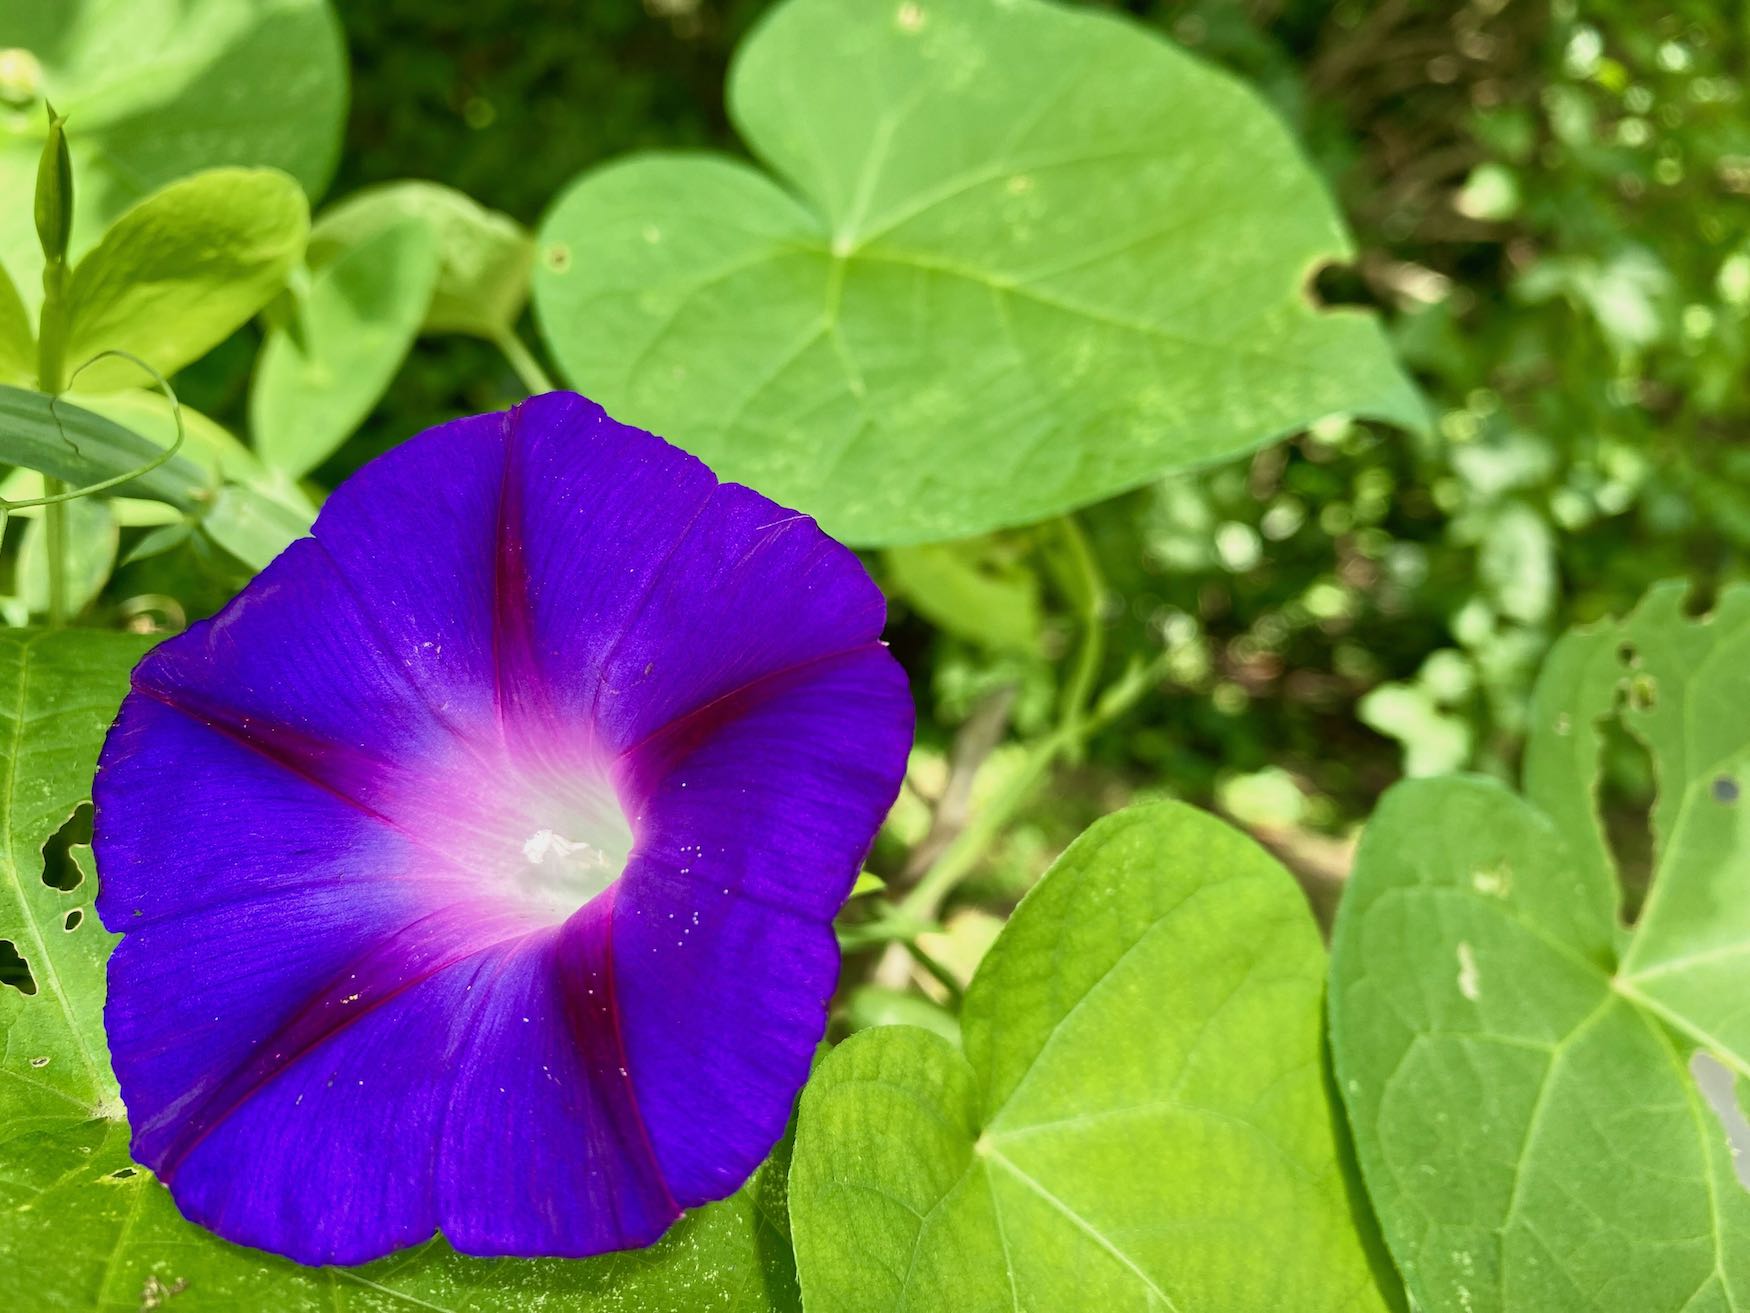 It's the weekend! Number 312, Morning Glory Blossom in the Sun